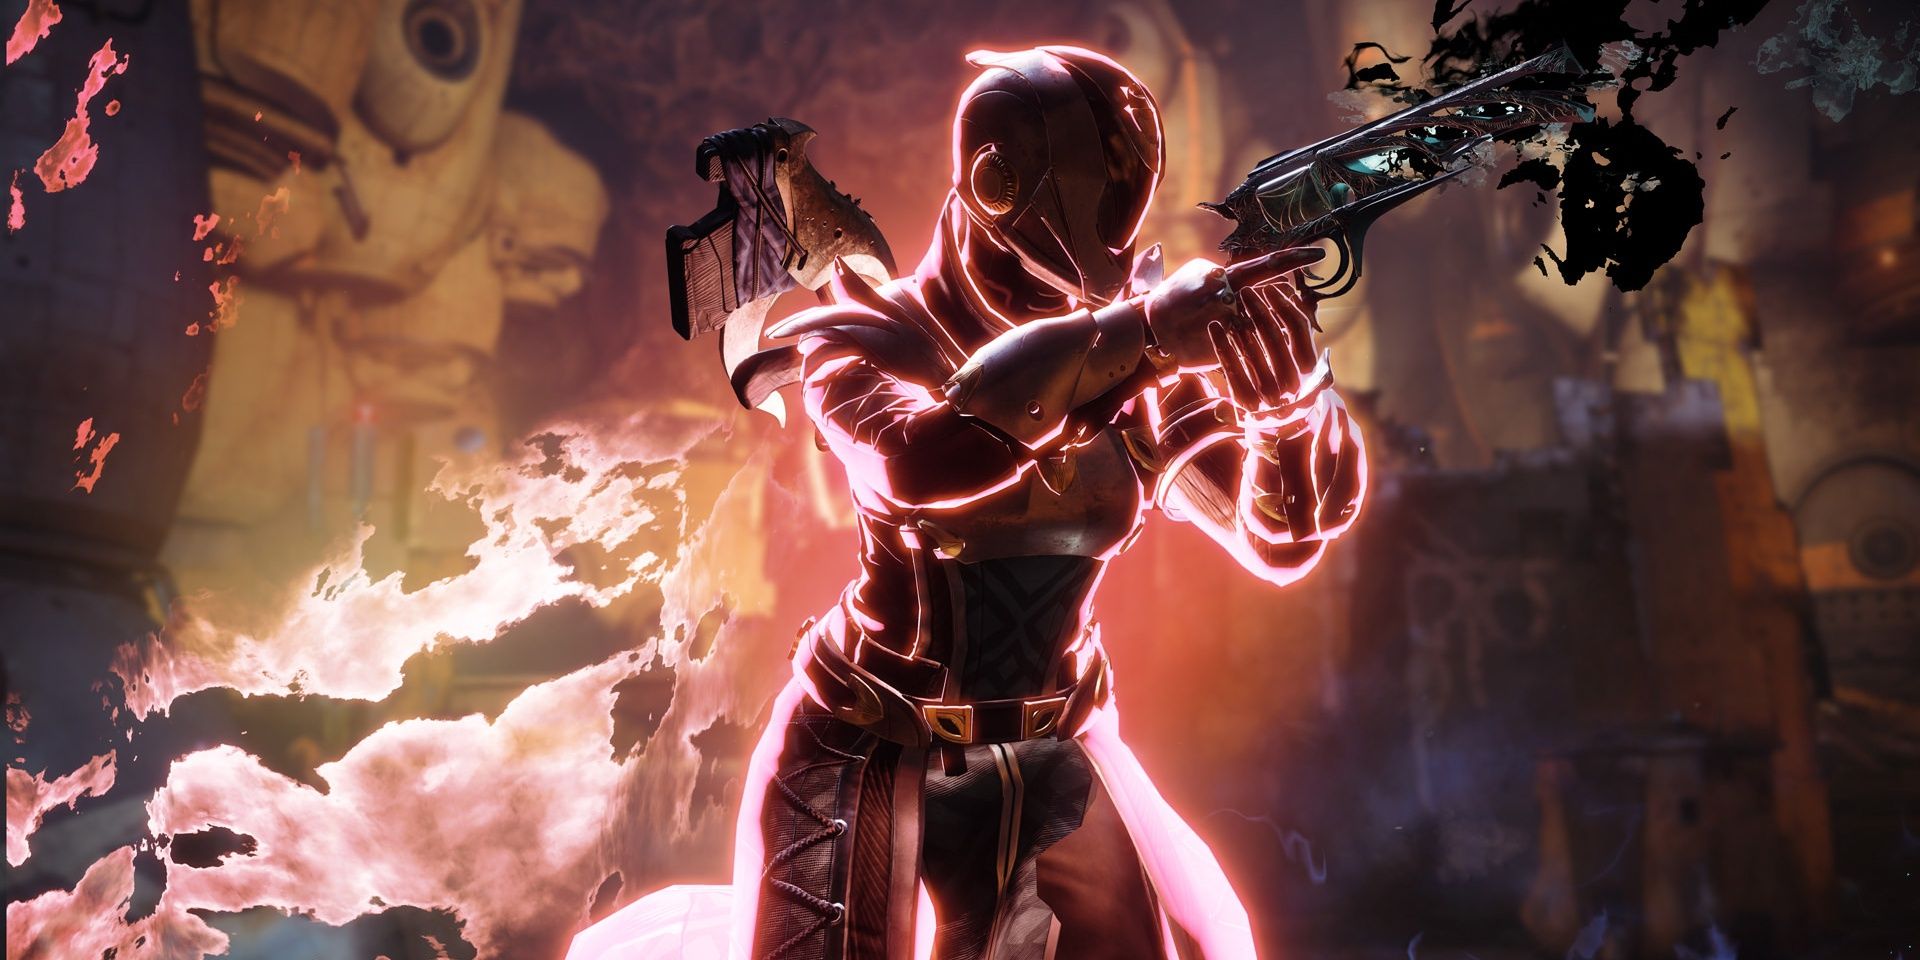 Enemy Invader holding a hand cannon in Gambit in Destiny 2